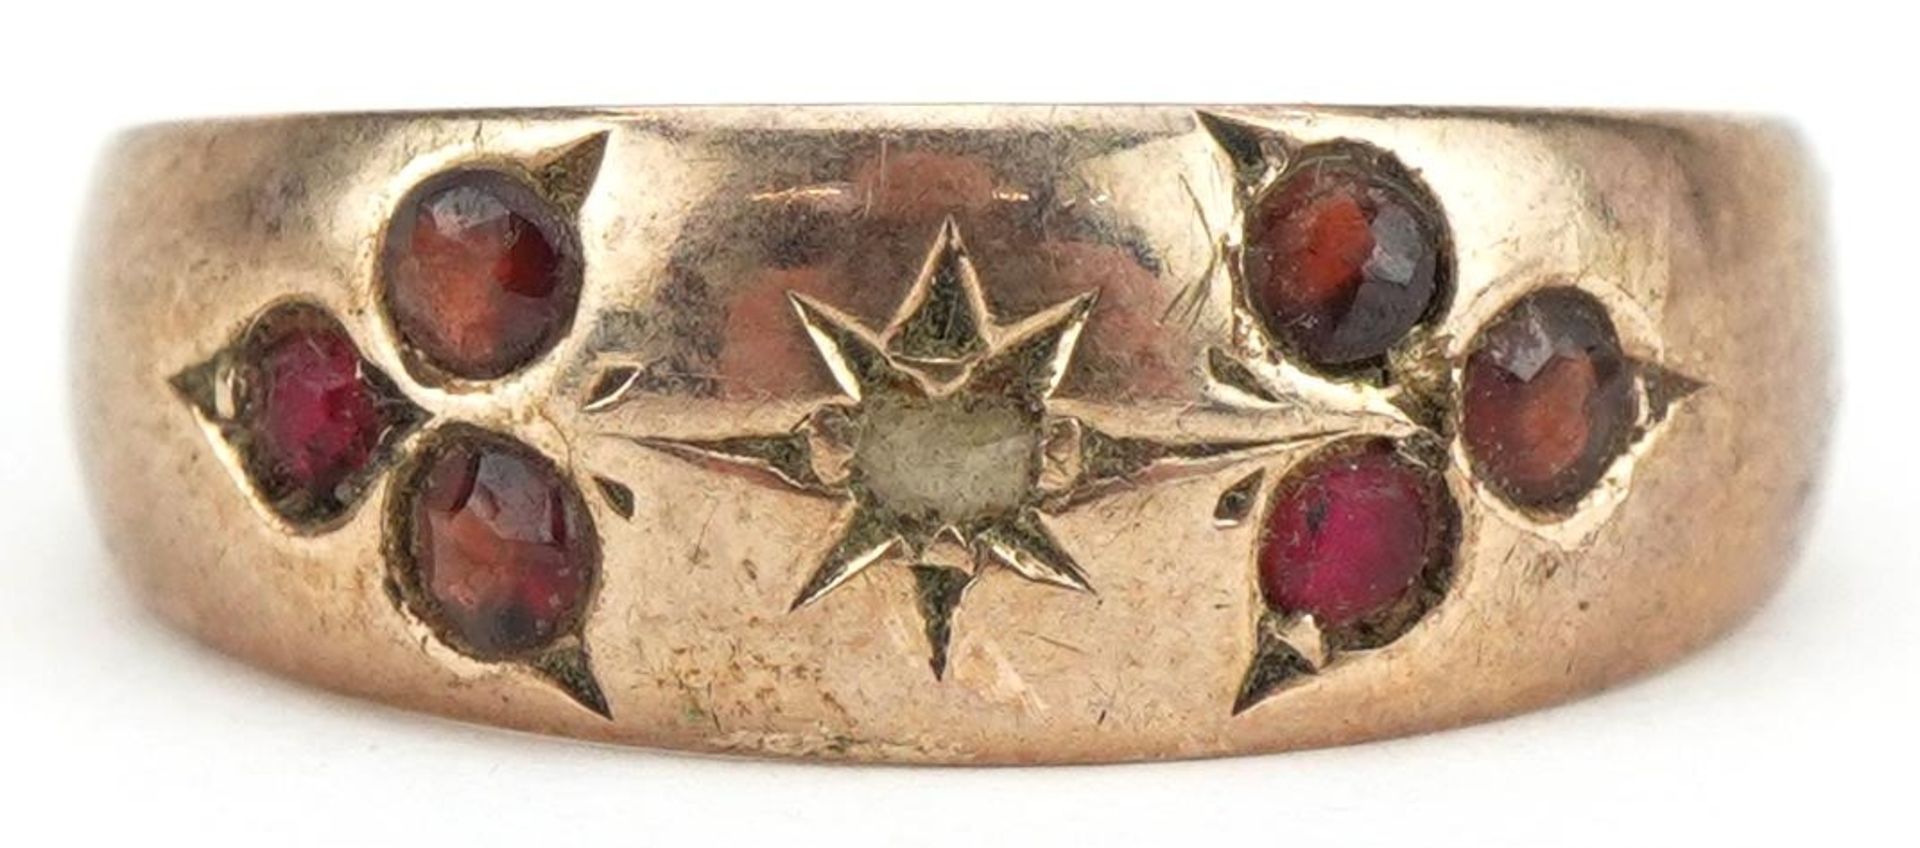 9ct rose gold garnet and diamond seven stone ring, size N, 1.9g